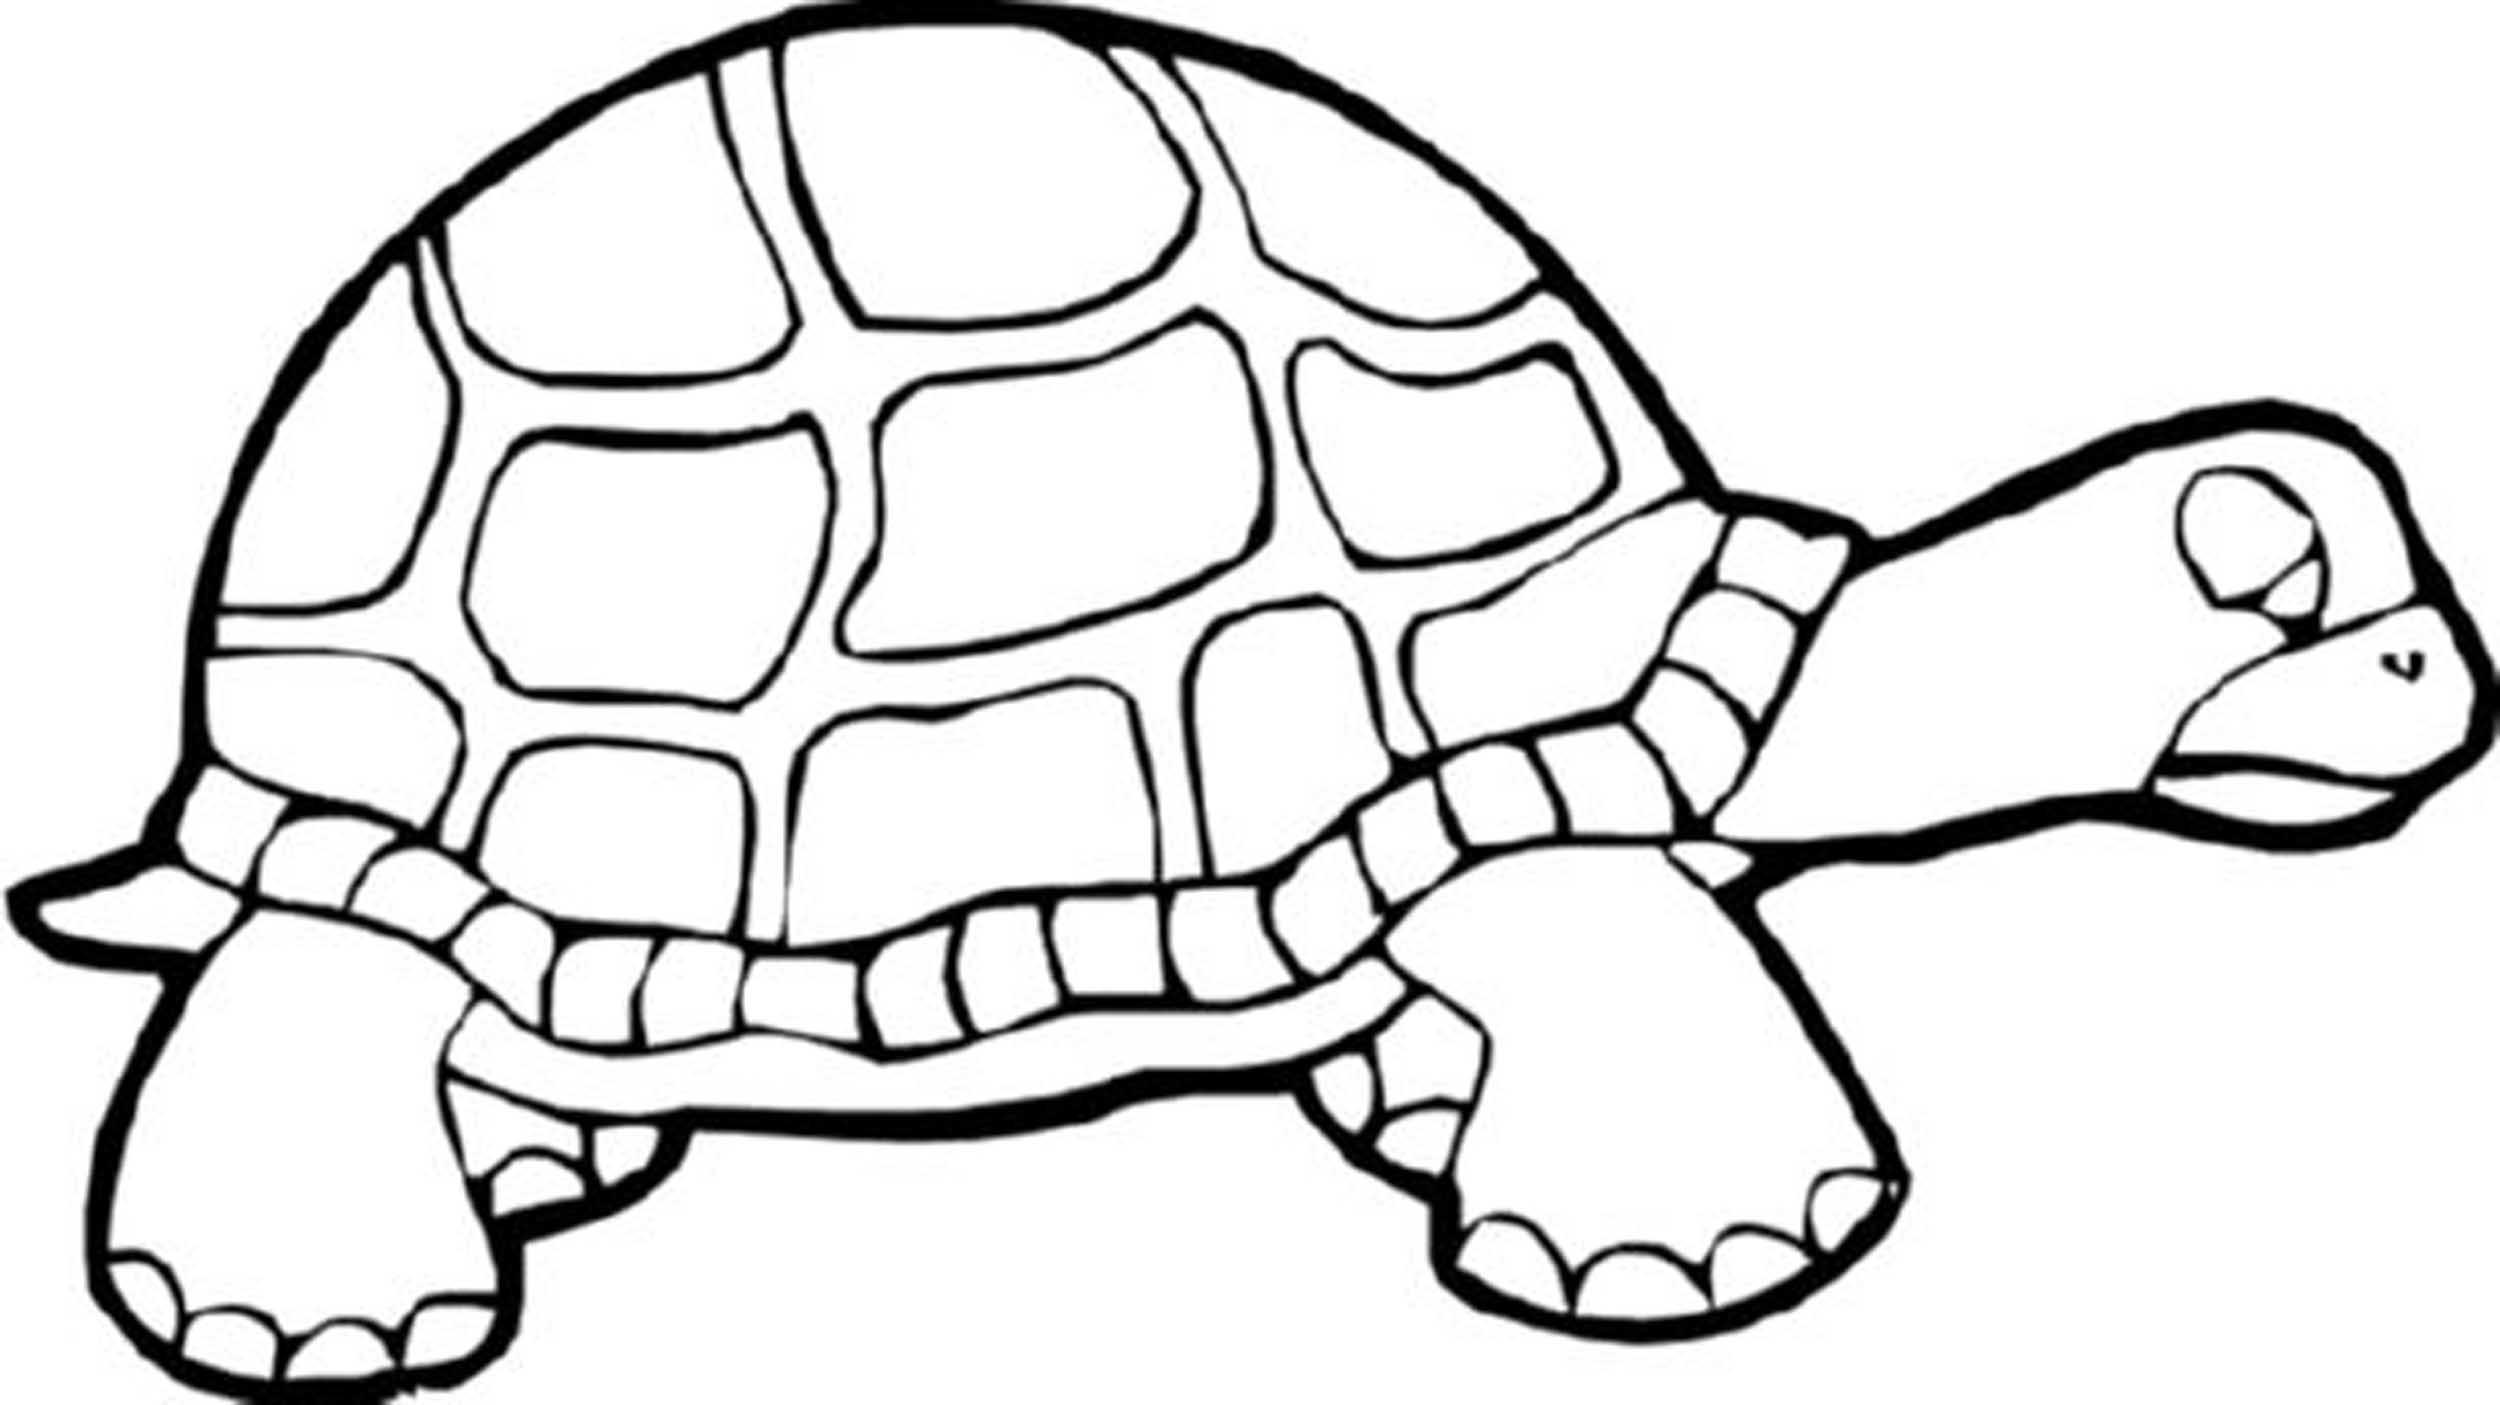 Turtle Coloring Pages | Free download on ClipArtMag